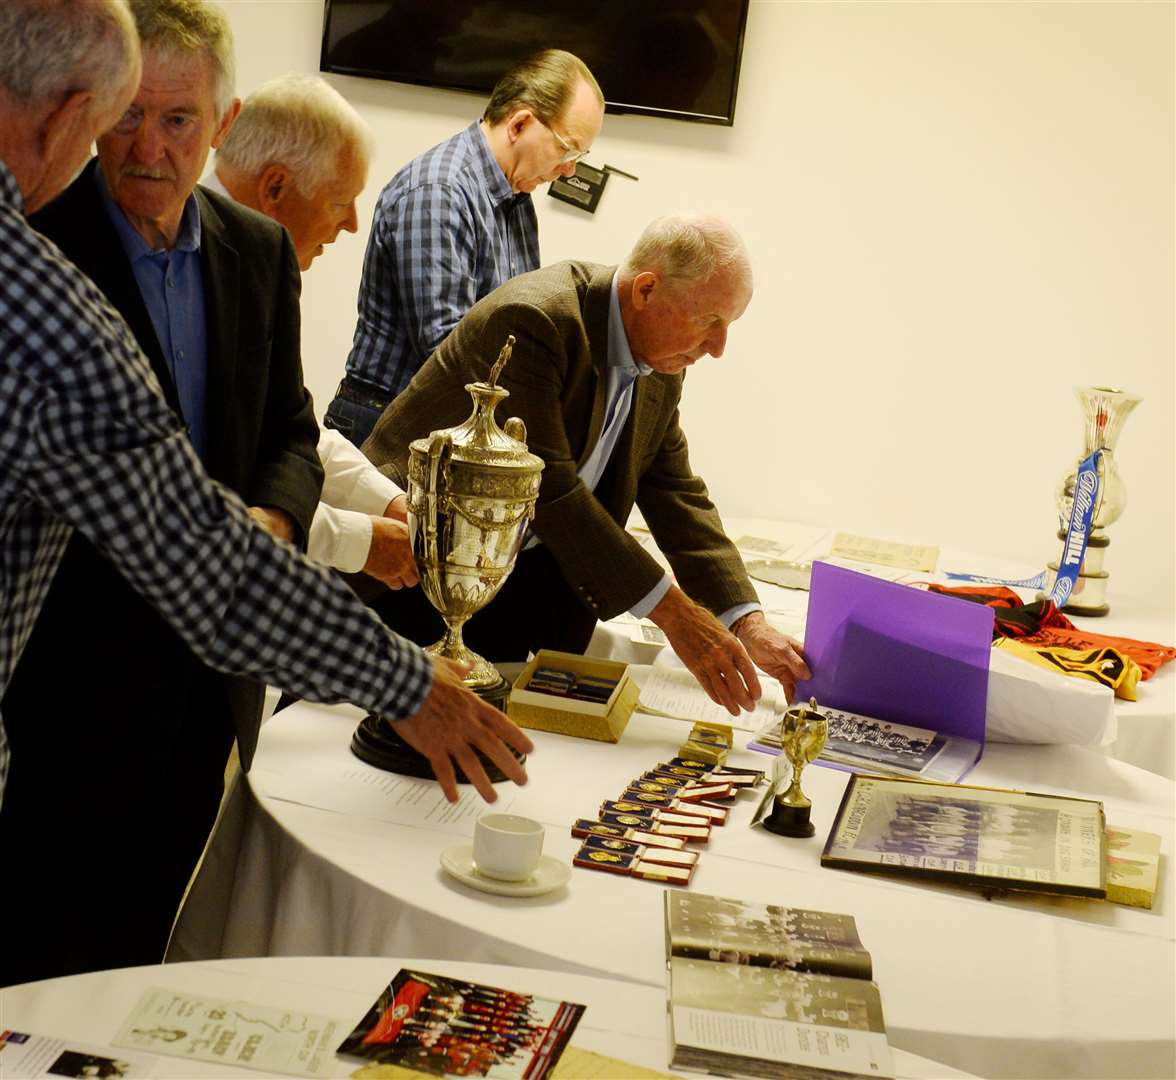 Memorabilia on show ranged from old photographs to medals.